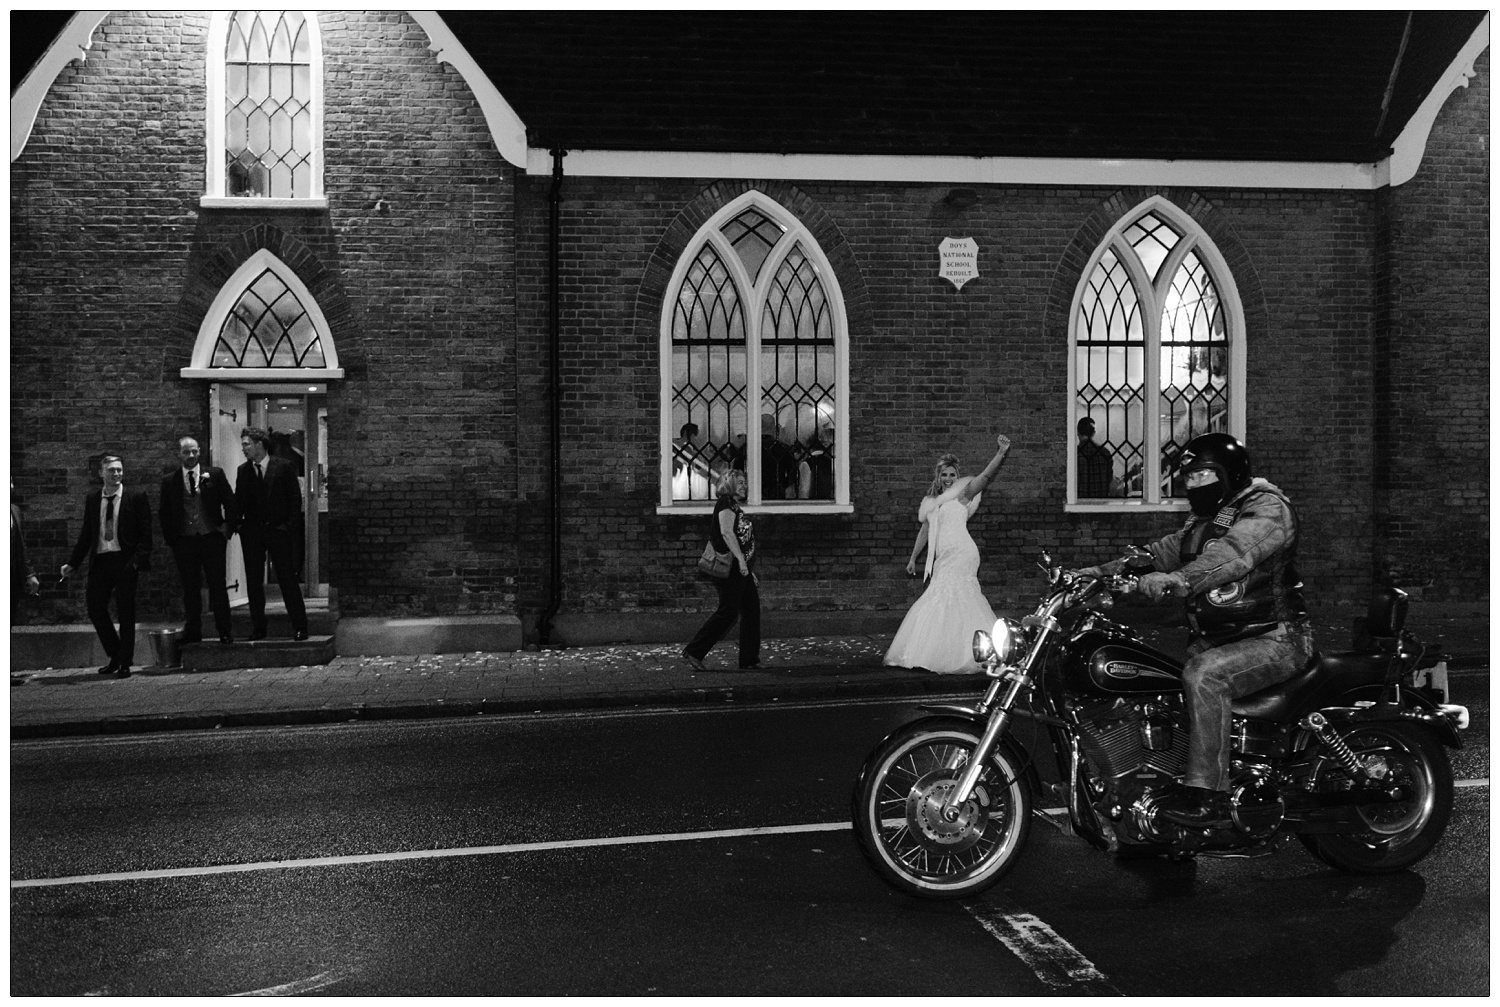 Bride raising her arm to greet the man on a motorbike riding past the Old Parish Rooms wedding venue in Rayleigh. The groom and two other men stand on the doorstep.